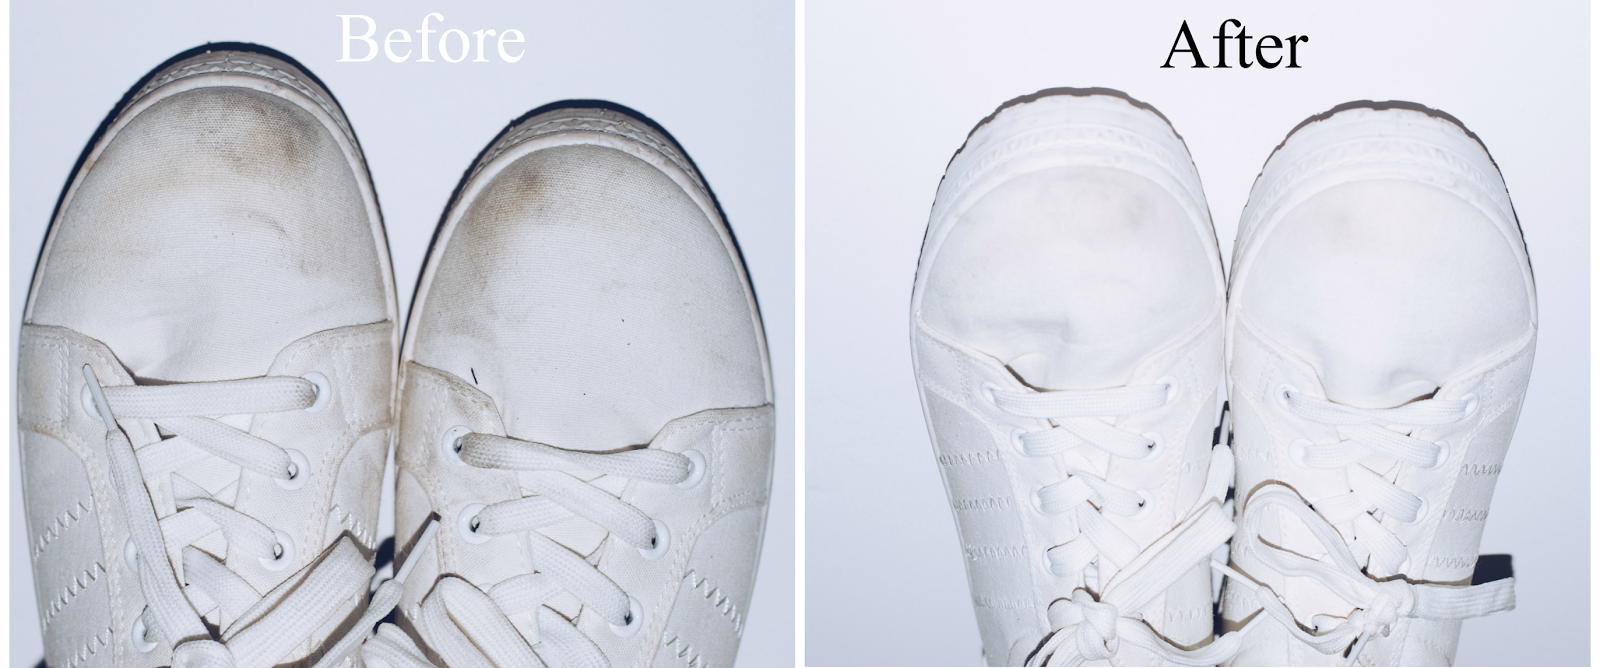 How To Get Shoes White Again - LoveShoesClub.com